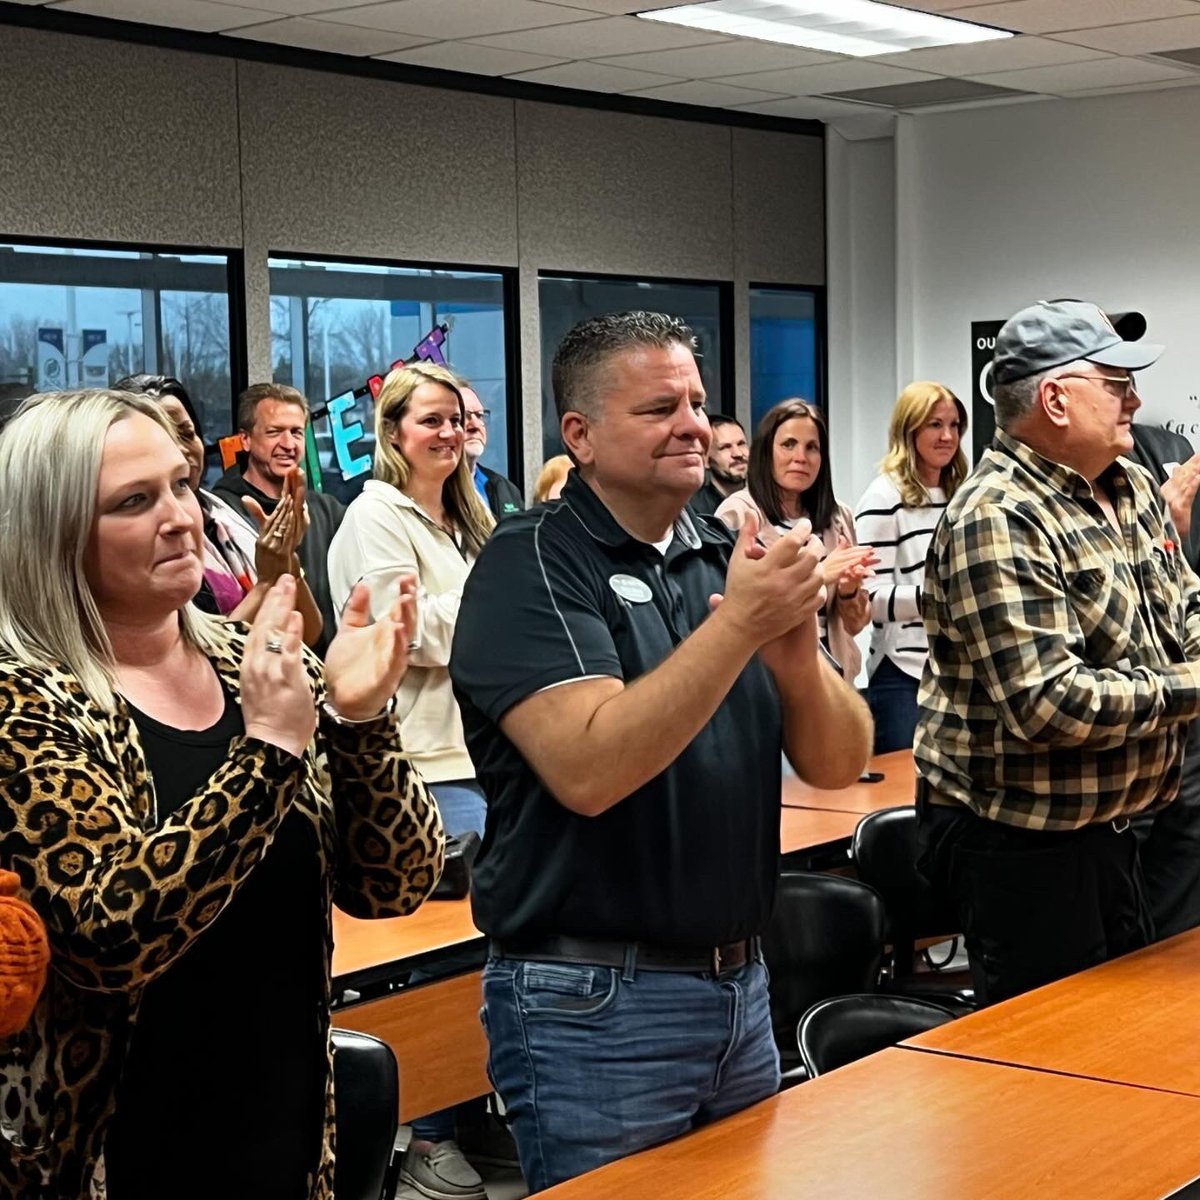 We got the chance to say thank you to Brad Seeba for 47 years of service to Rydell! We were able to celebrate 🎉 with some laughs & memories with Brad, his family & Rydell team. Brad will be missed! Best of luck Brad to you & your Family, Beth, Brianna, Bryna. #Rydell1Team